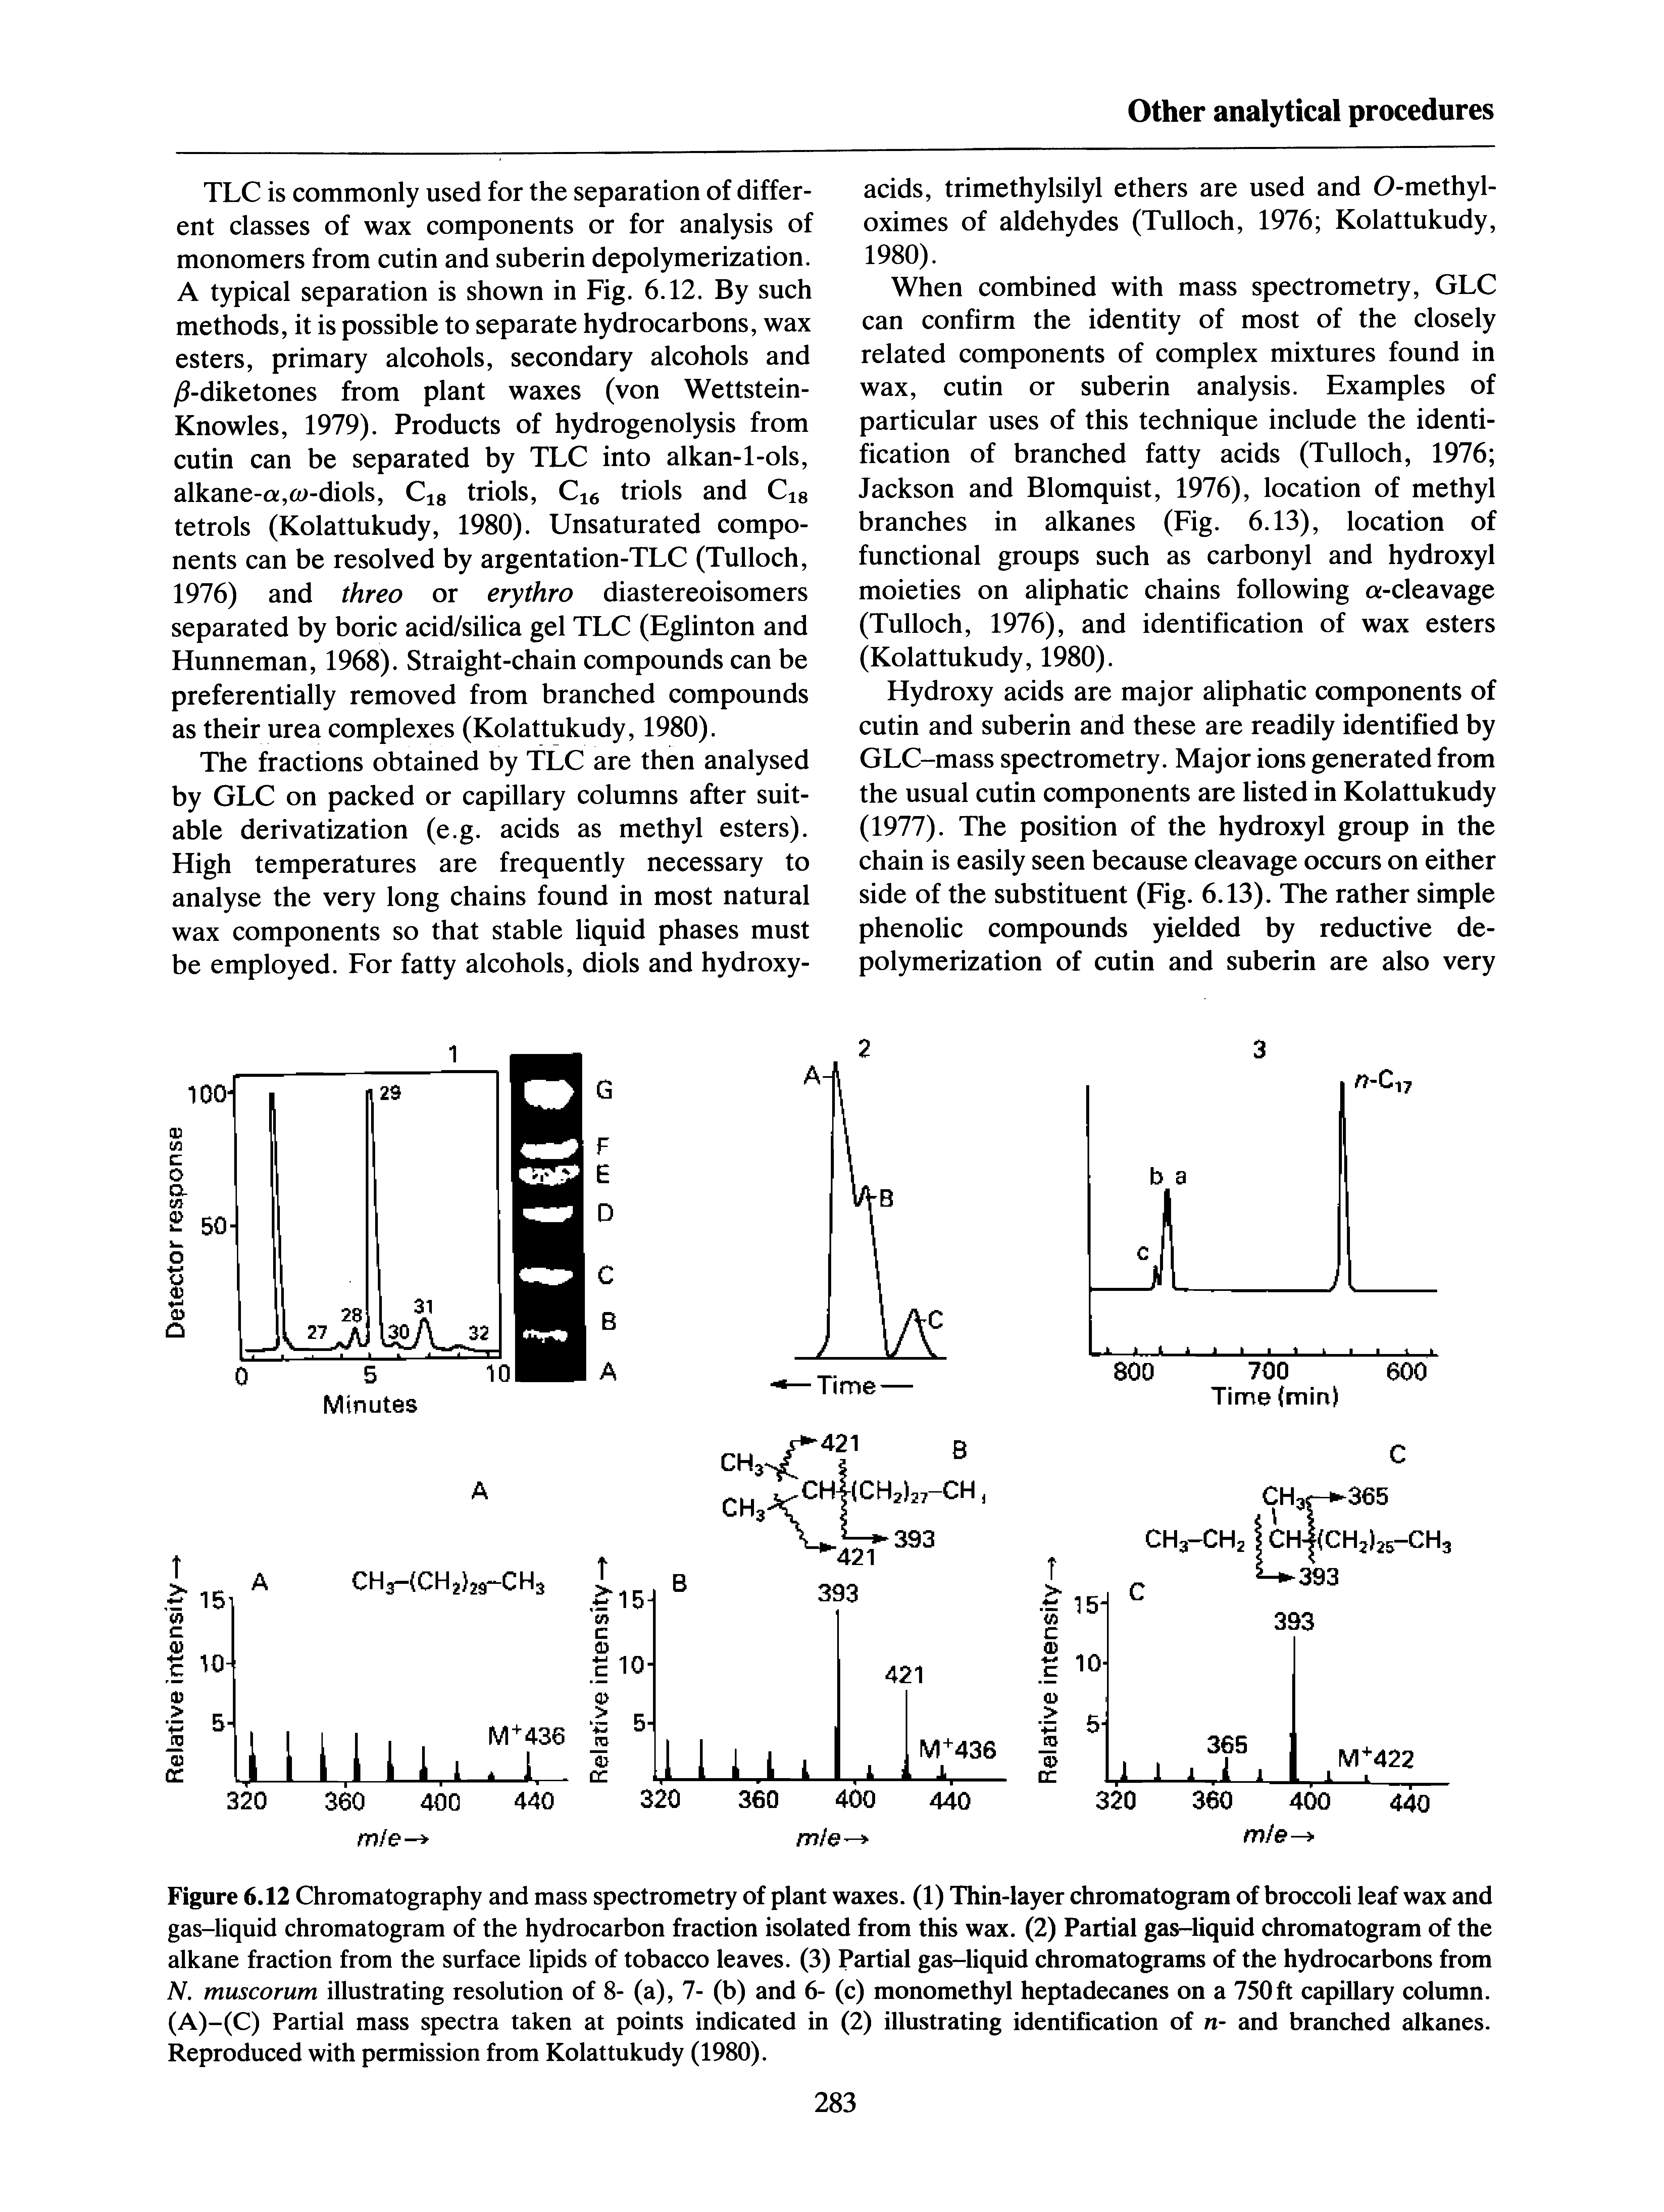 Figure 6.12 Chromatography and mass spectrometry of plant waxes. (1) Thin-layer chromatogram of broccoli leaf wax and gas-liquid chromatogram of the hydrocarbon fraction isolated from this wax. (2) Partial gas-liquid chromatogram of the alkane fraction from the surface lipids of tobacco leaves. (3) Partial gas-liquid chromatograms of the hydrocarbons from N. muscorum illustrating resolution of 8- (a), 7- (b) and 6- (c) monomethyl heptadecanes on a 750ft capillary column. (A)-(C) Partial mass spectra taken at points indicated in (2) illustrating identification of n- and branched alkanes. Reproduced with permission from Kolattukudy (1980).